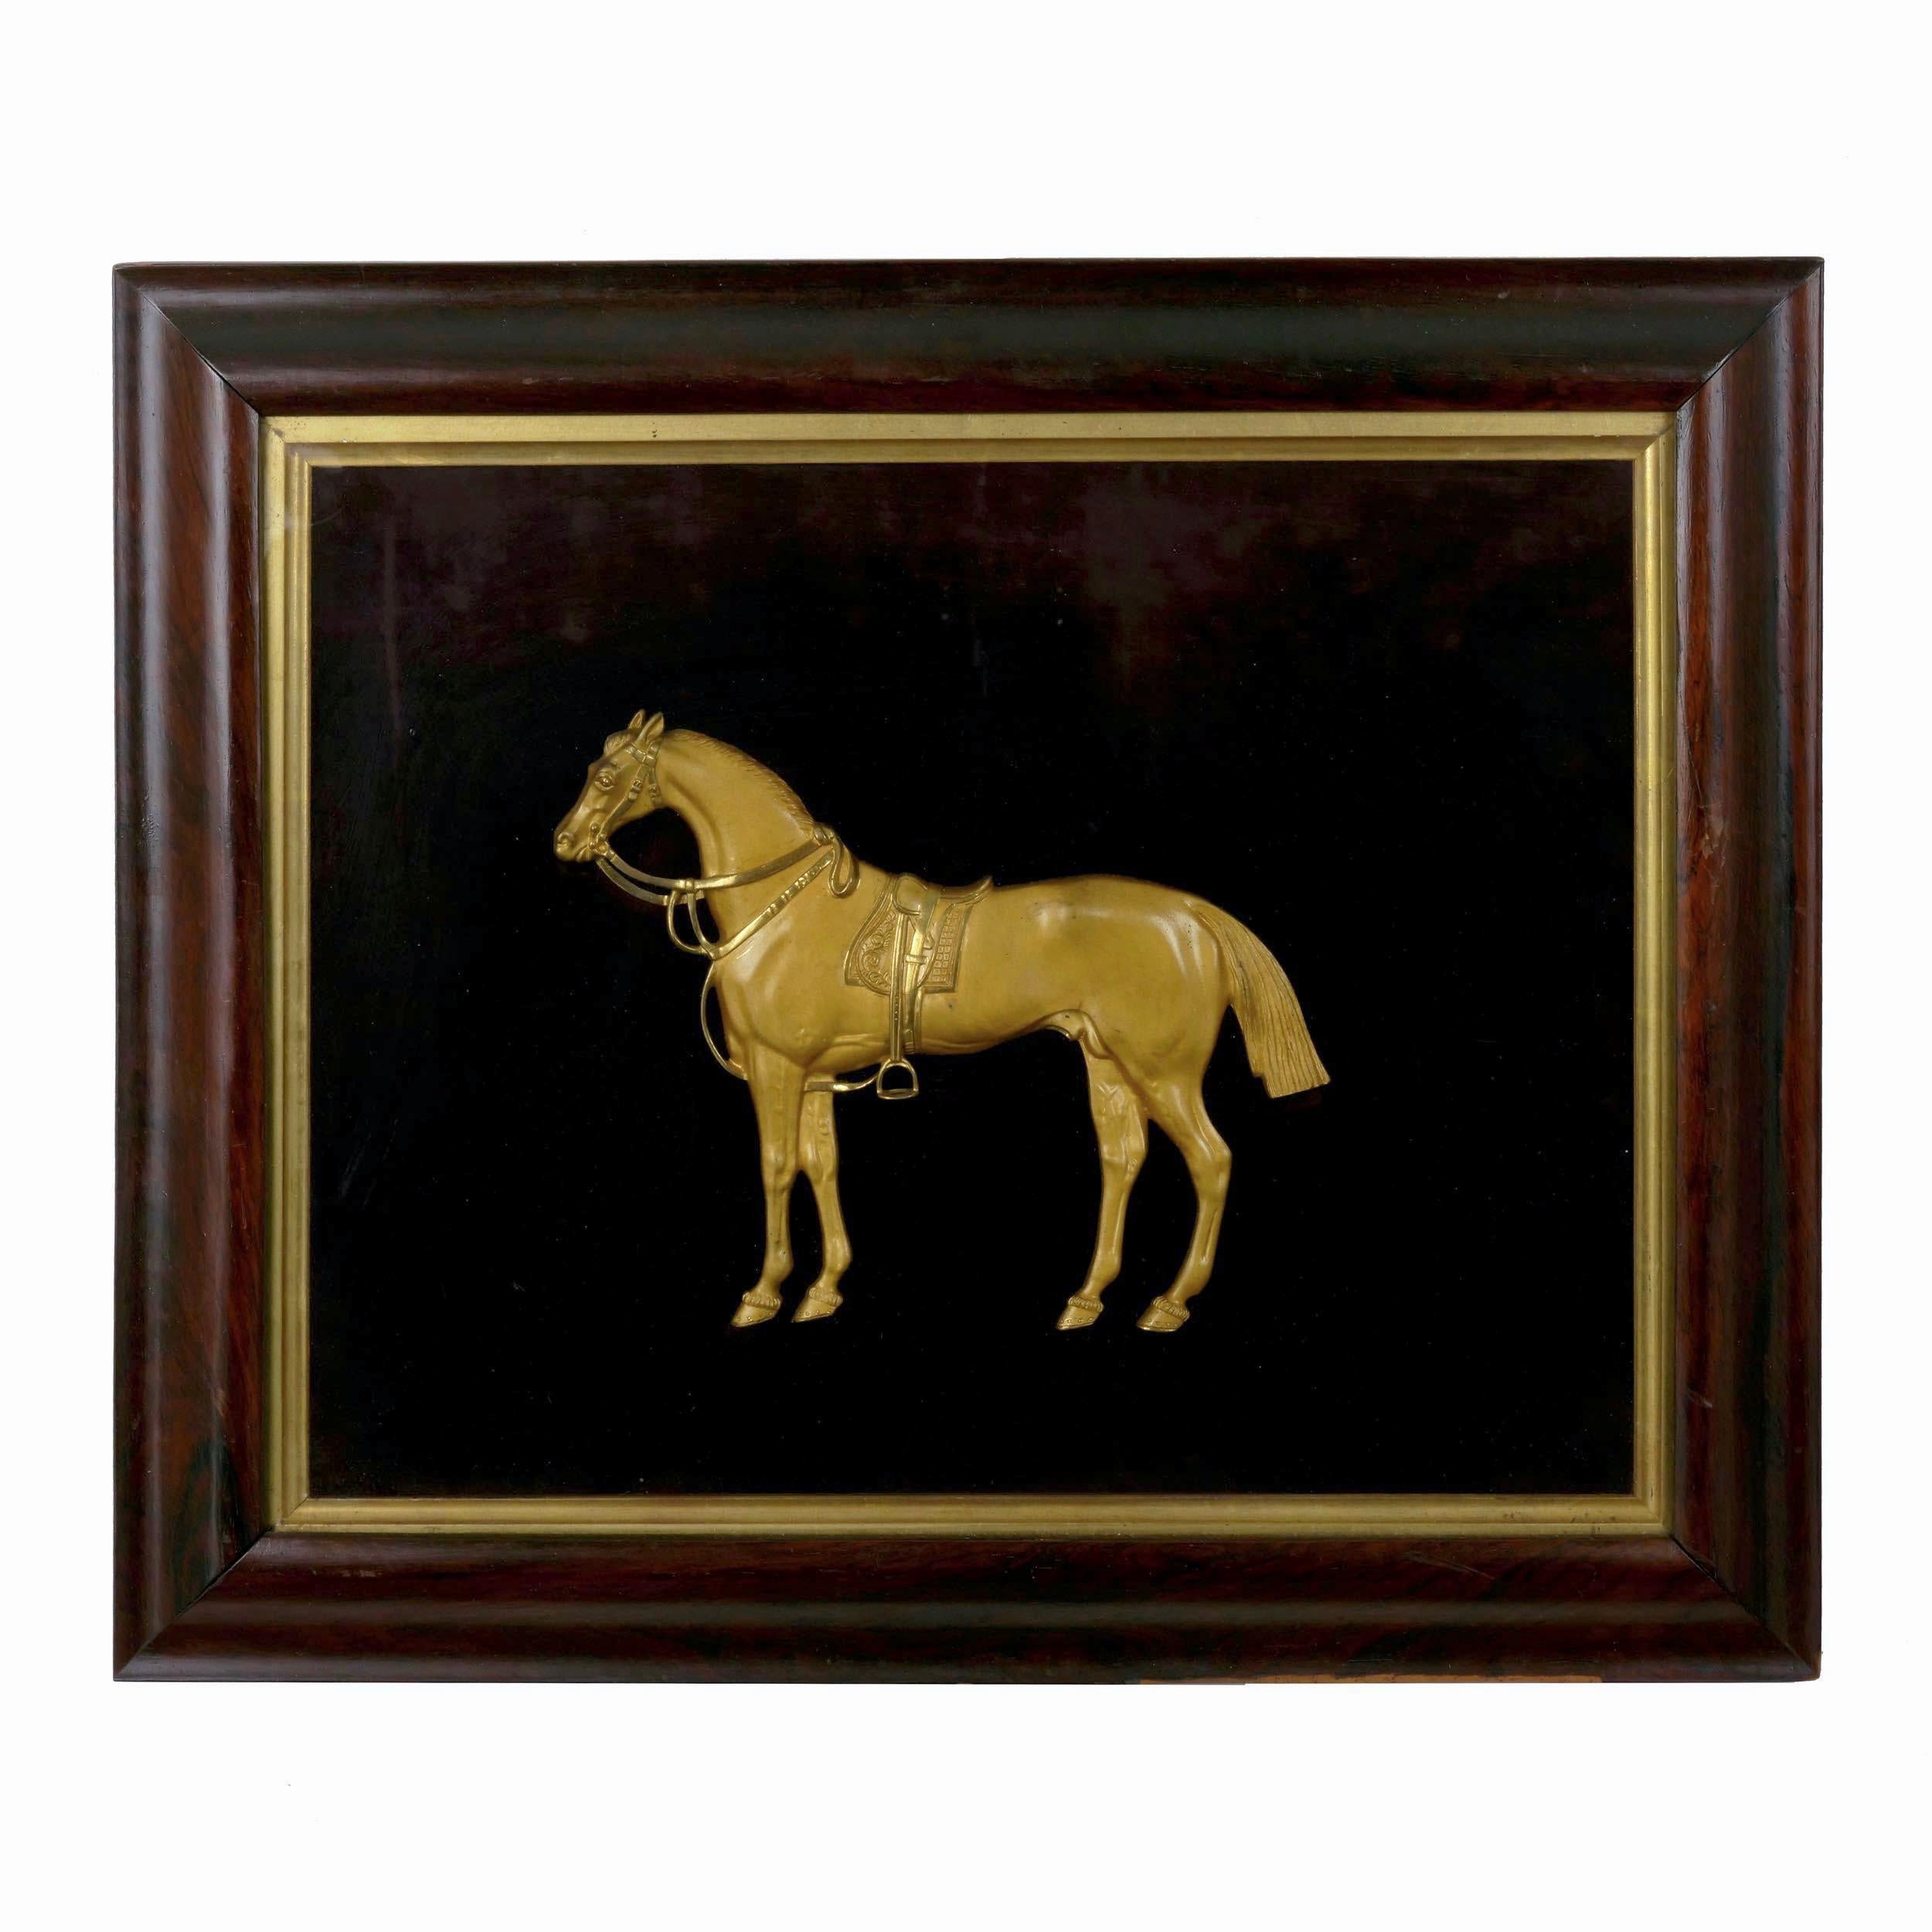 This very fine pair of 19th century equestrian gilt plaques depict an opposing pair of horses with an early Romantic stylizing, both cast in bronze and gilded with a dusty matte gold against burnished highlights. Both are of the finest quality in